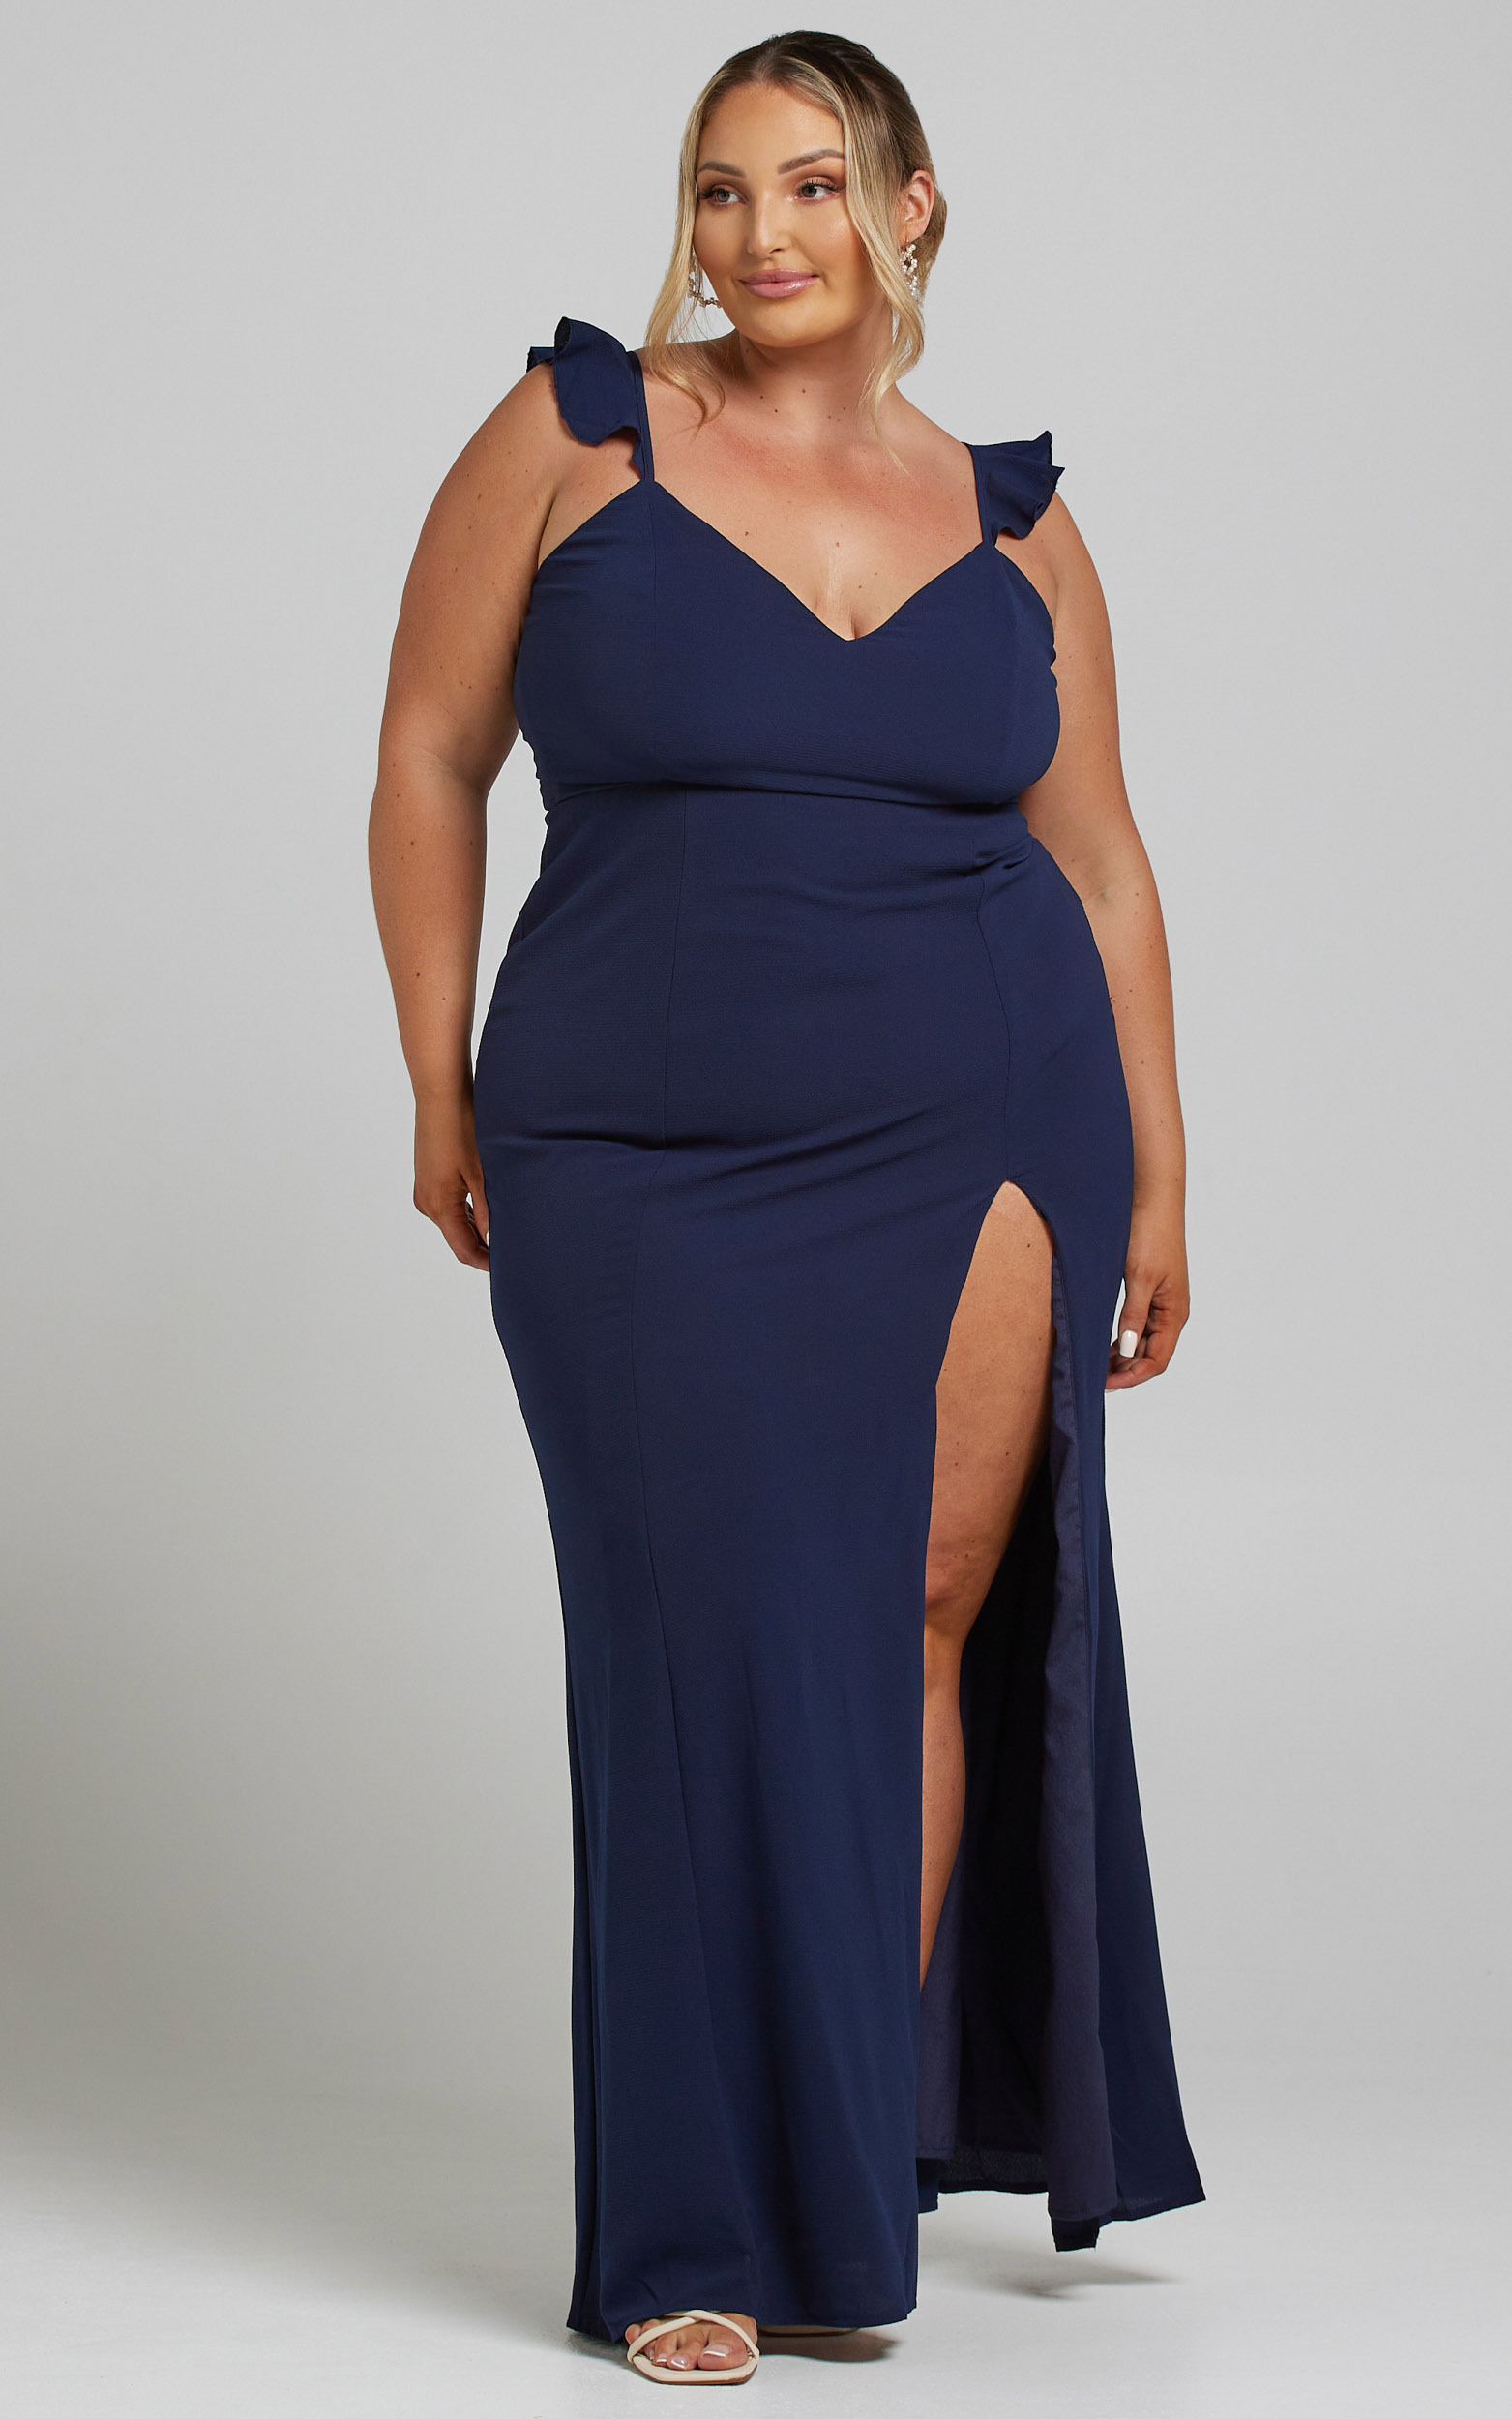 More Than This Ruffle Strap Maxi Dress in Navy - 04, NVY3, hi-res image number null